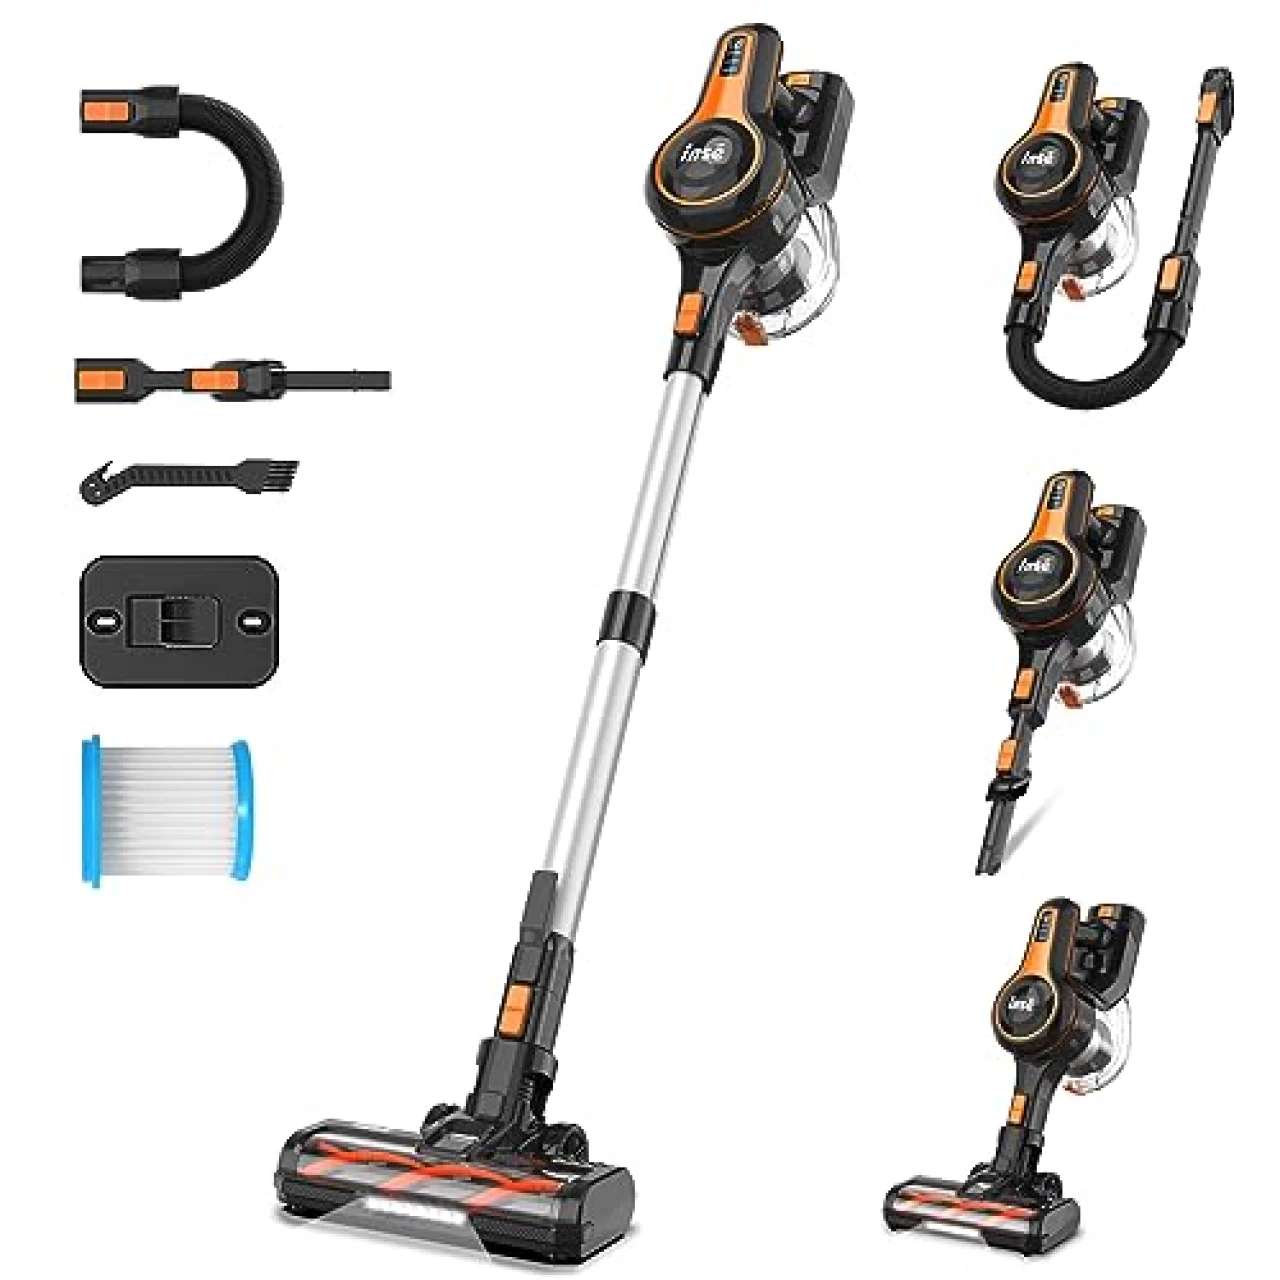 INSE Cordless Vacuum Cleaner, 28Kpa 300W Powerful Cordless Stick Vacuum, 8-in-1 Rechargeable Vacuum with 2500m-Ah Battery, 45min Runtime Lightweight Stick Vacuum for Pet Hair Hard Floor Carpet Home